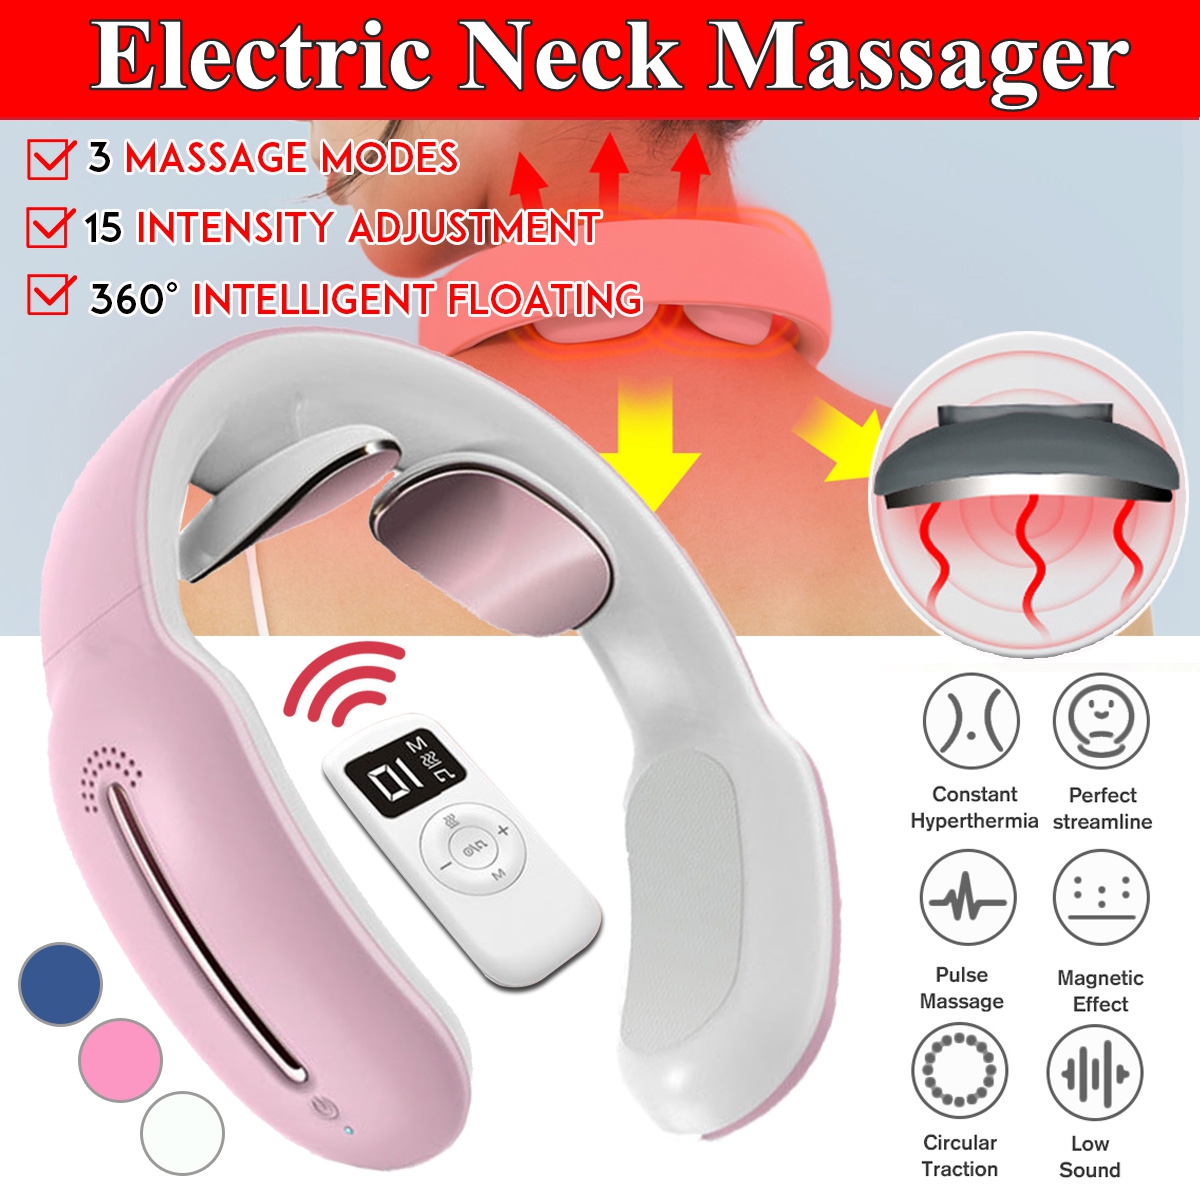 Electric-Neck-Massager-15-Gears-Vibration-Pulse-Cervical-Neck-Body-Shoulder-Muscle-Relax-Relieve-Pai-1768556-1